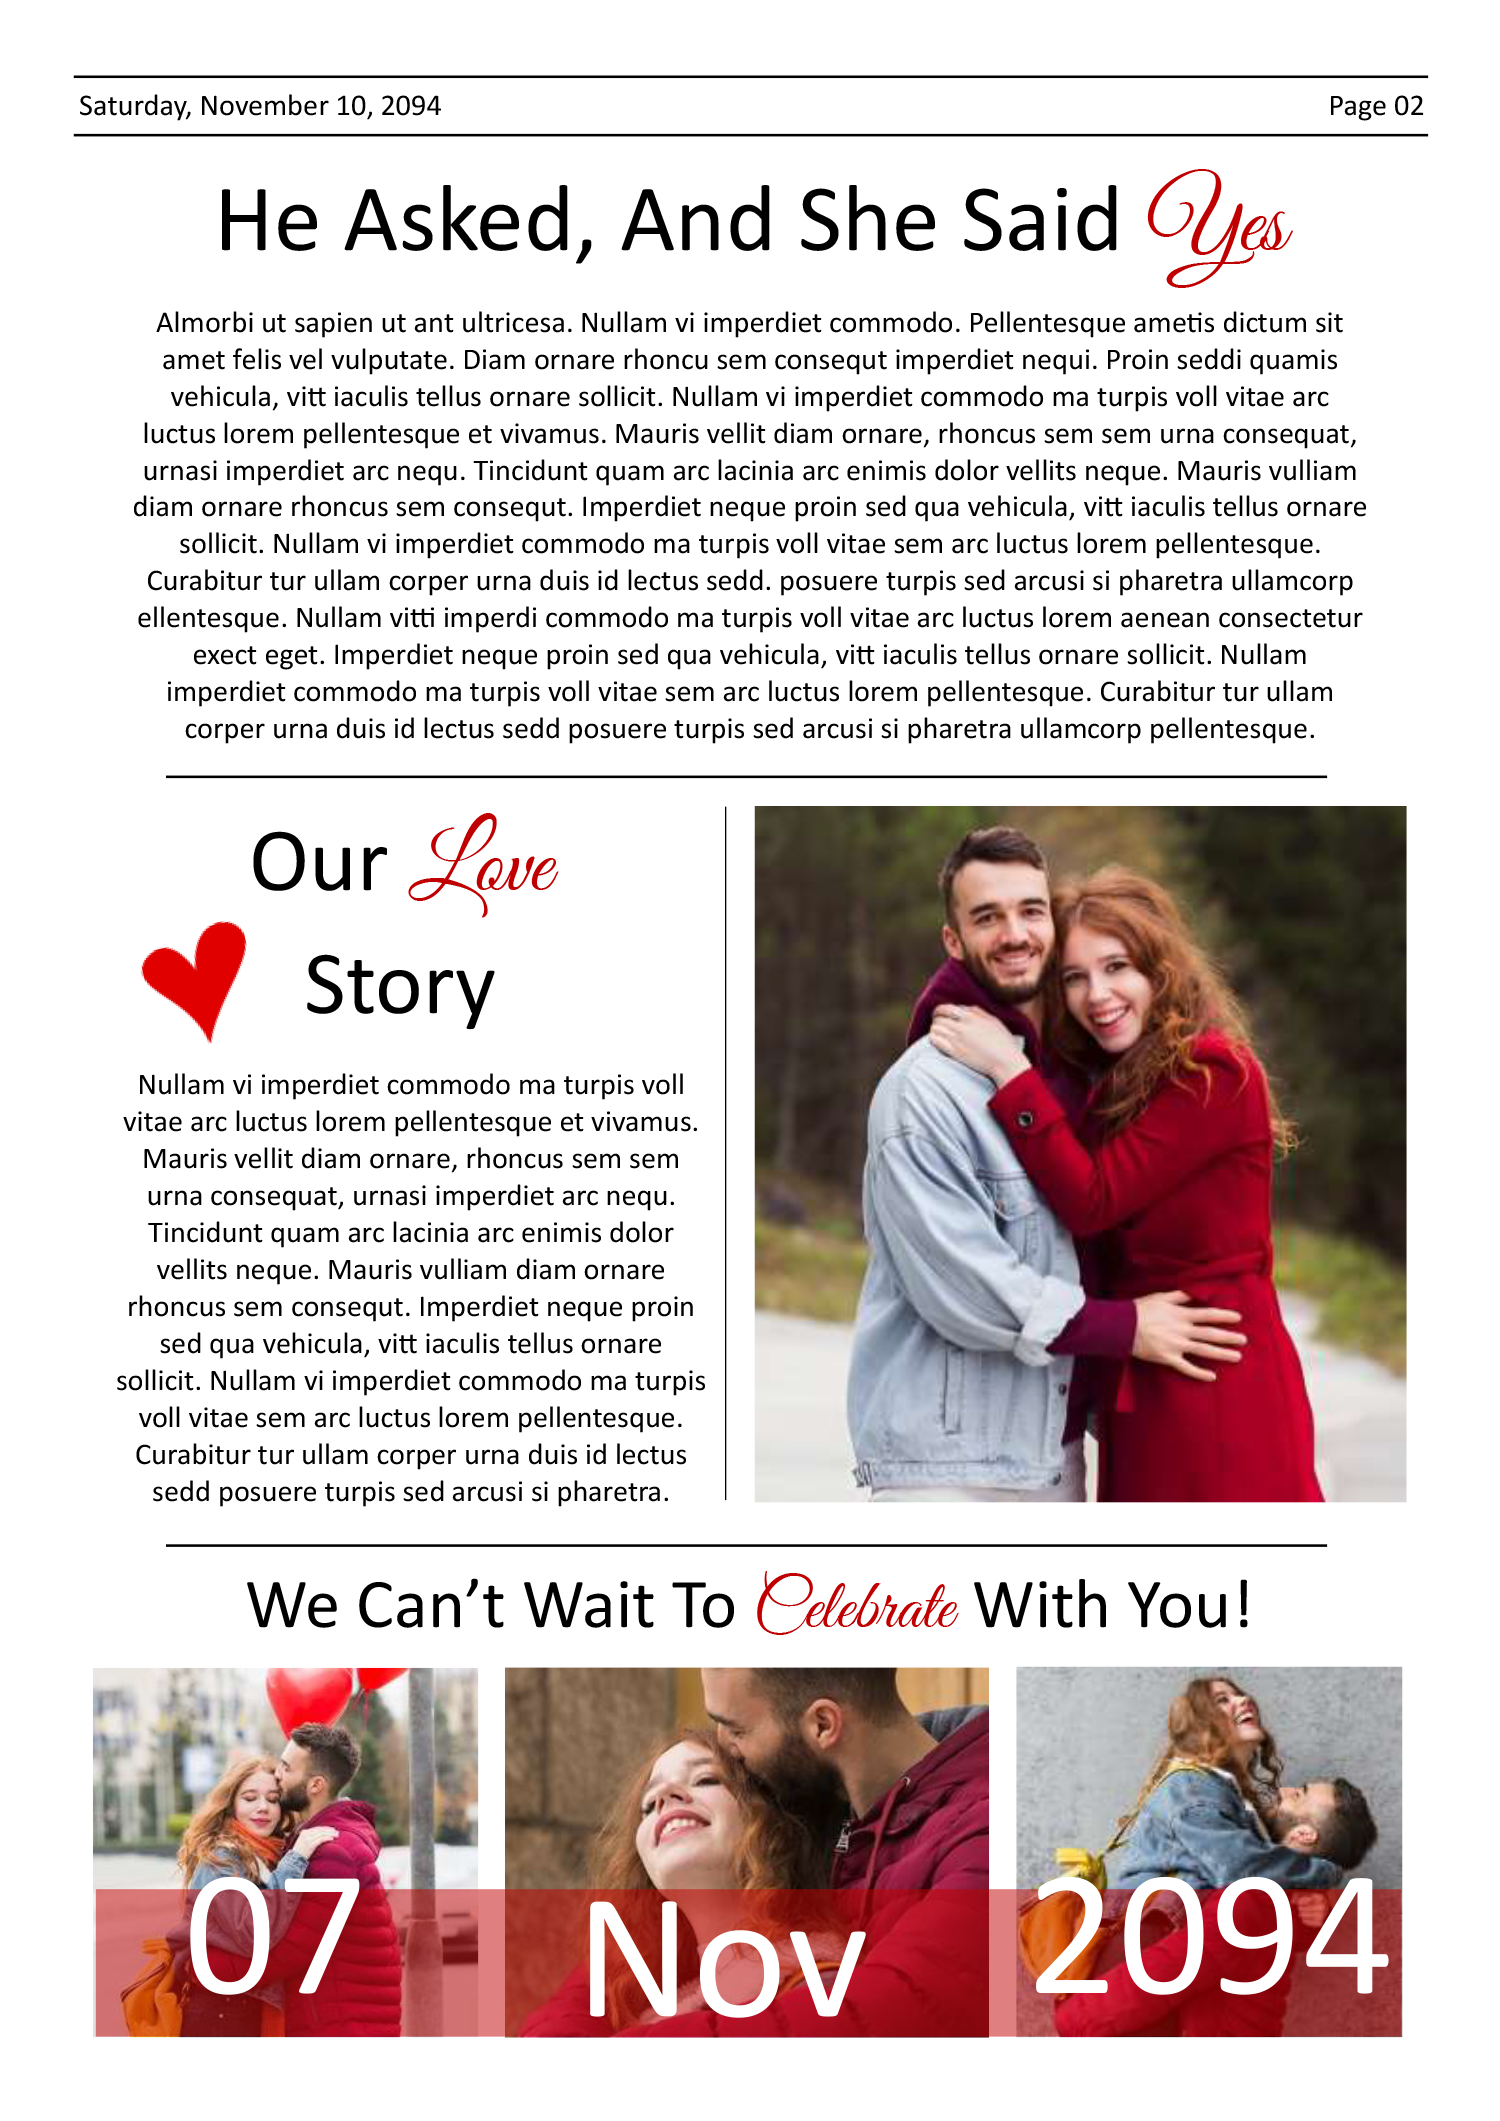 Wedding Engagement Newspaper Template - Page 02